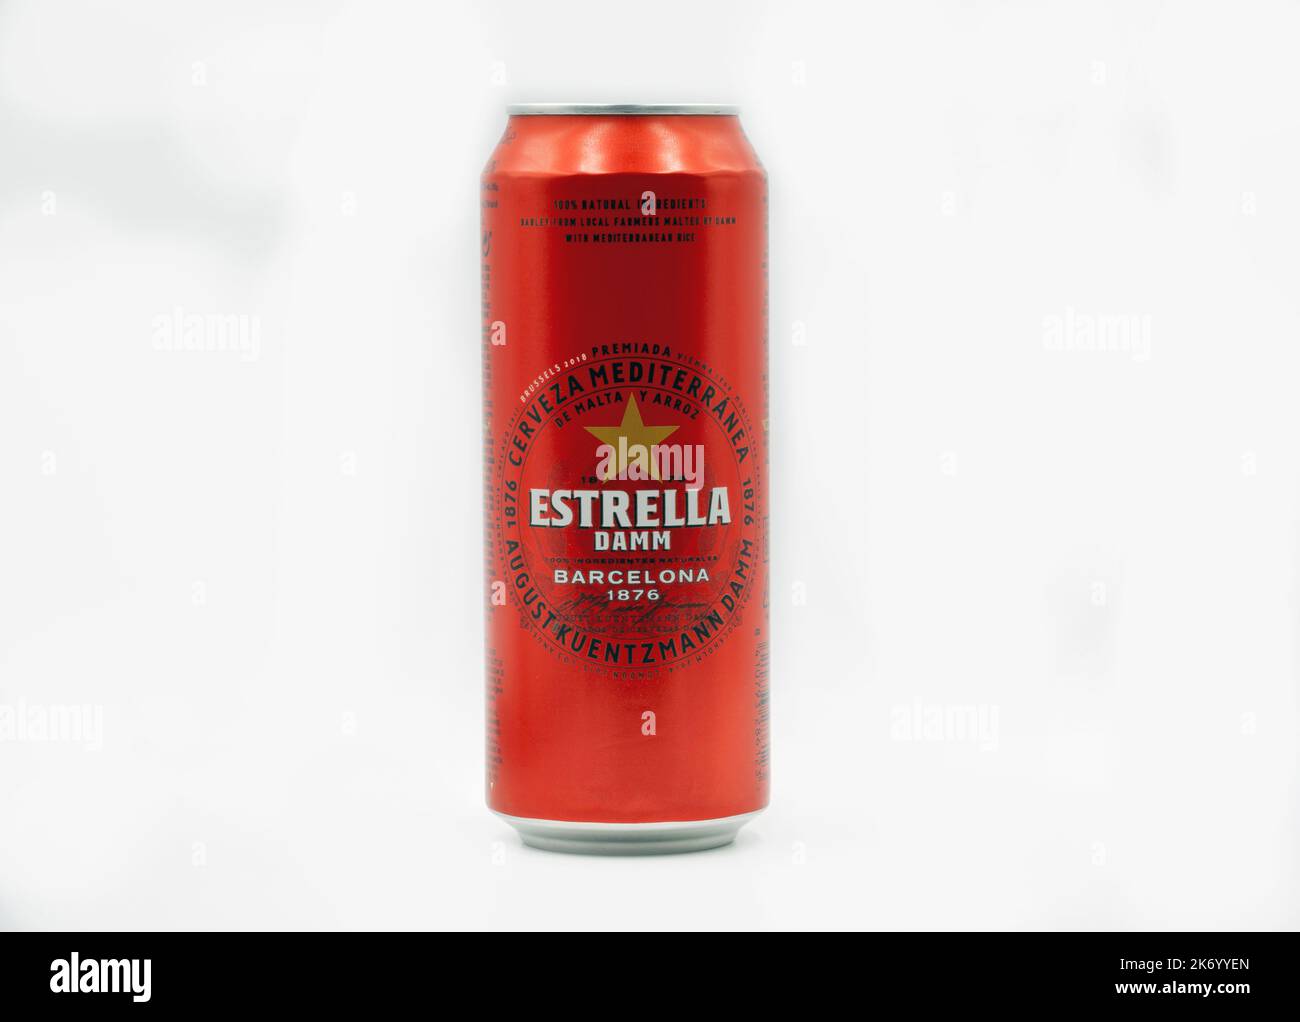 Kyiv, Ukraine - June 10, 2021: Studio shoot of Spanish beer Estrella can from manufacturer Barcelona brewery S.A. Damm closeup on white. Stock Photo